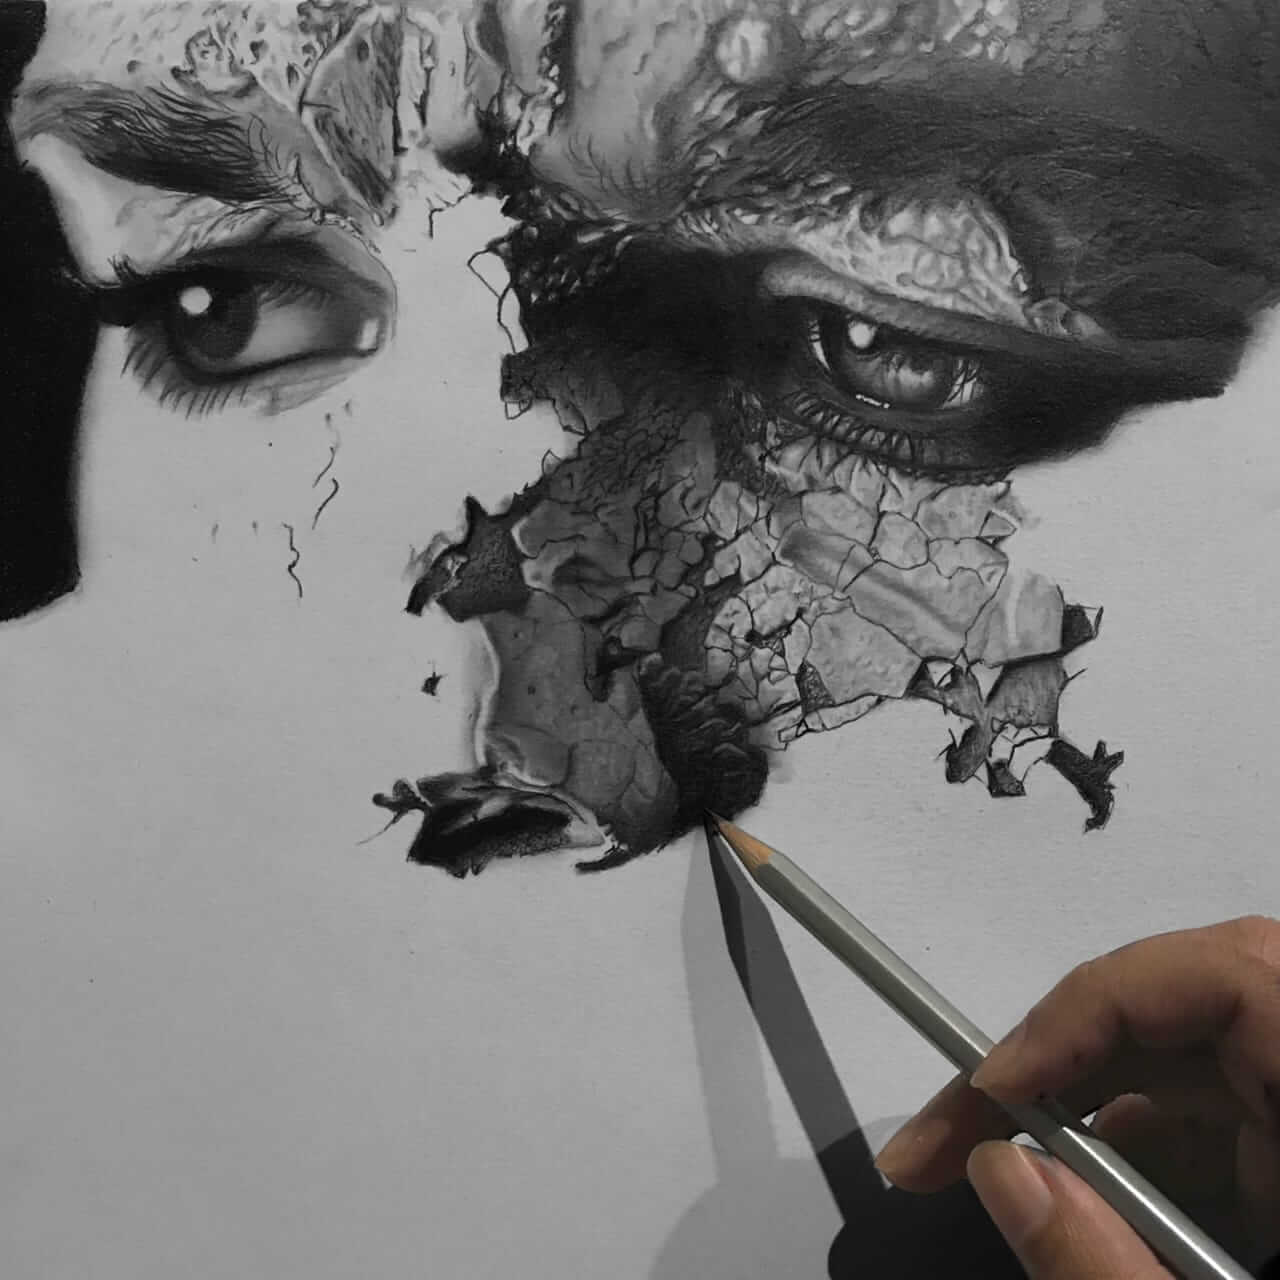 Hyper Realistic Drawing | Old Man Portrait - YouTube